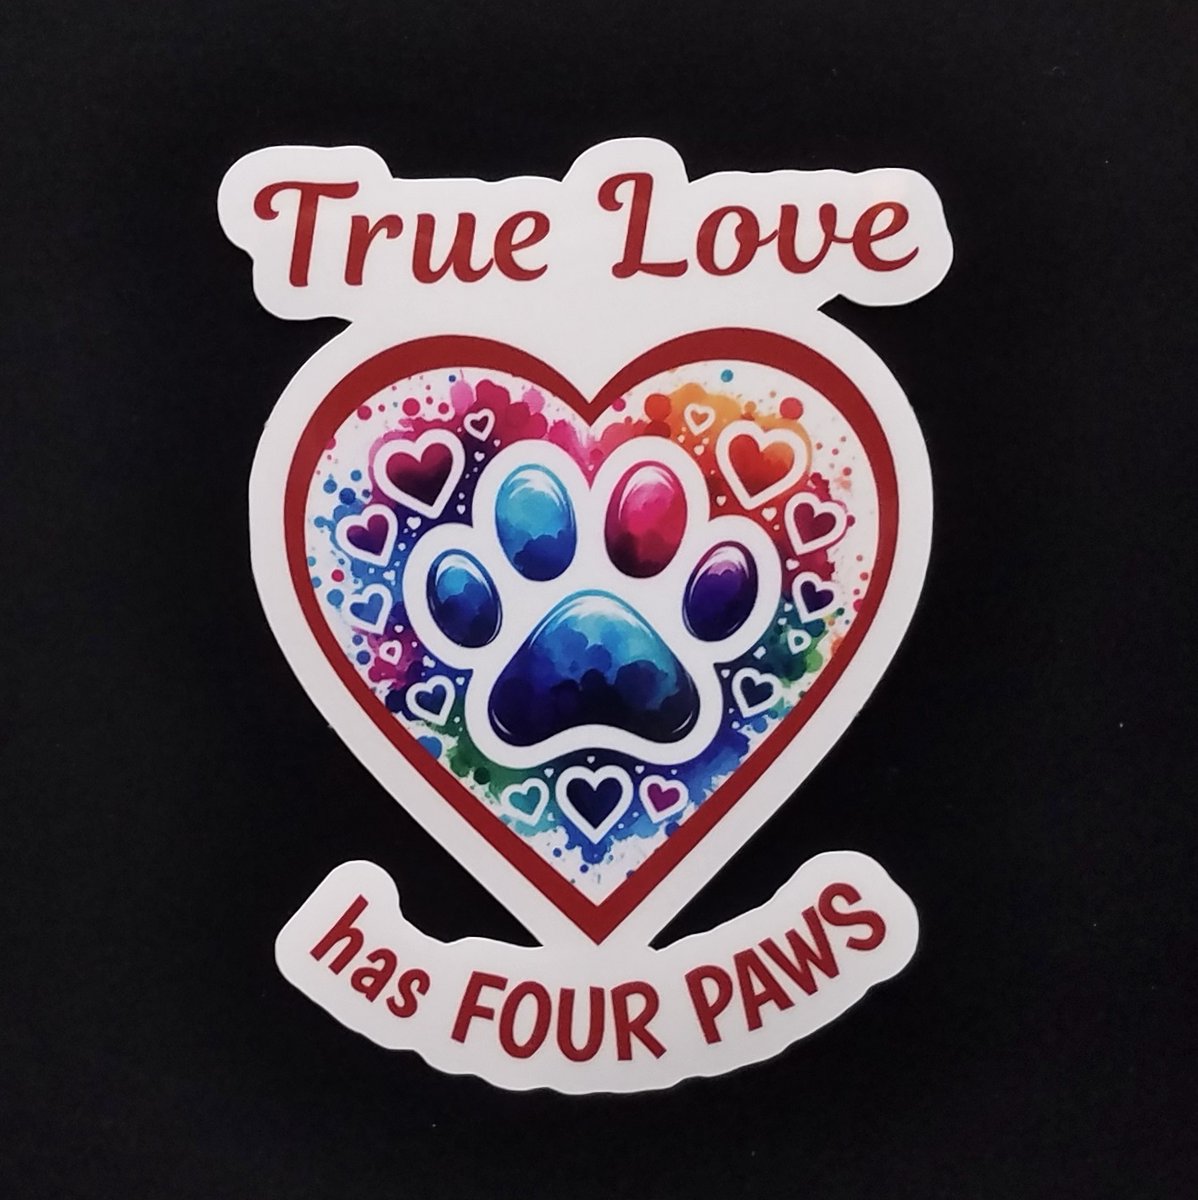 CONGRATS 5 WINNERS🎉
STICK With Love #KindnessGiveaway !
FANKS To Maggie & Leo @jppatter25 For Sponsoring!💕
I'll DM For Address!
True Love Has Four Paws 5-Pack of Stickers:
Speedy @kimberly_2003
Joli @LilytheSamoyed
Lily @loriann612
Freya @FreyasMuttHut
Tequila @imstorm2010
♥️🐶